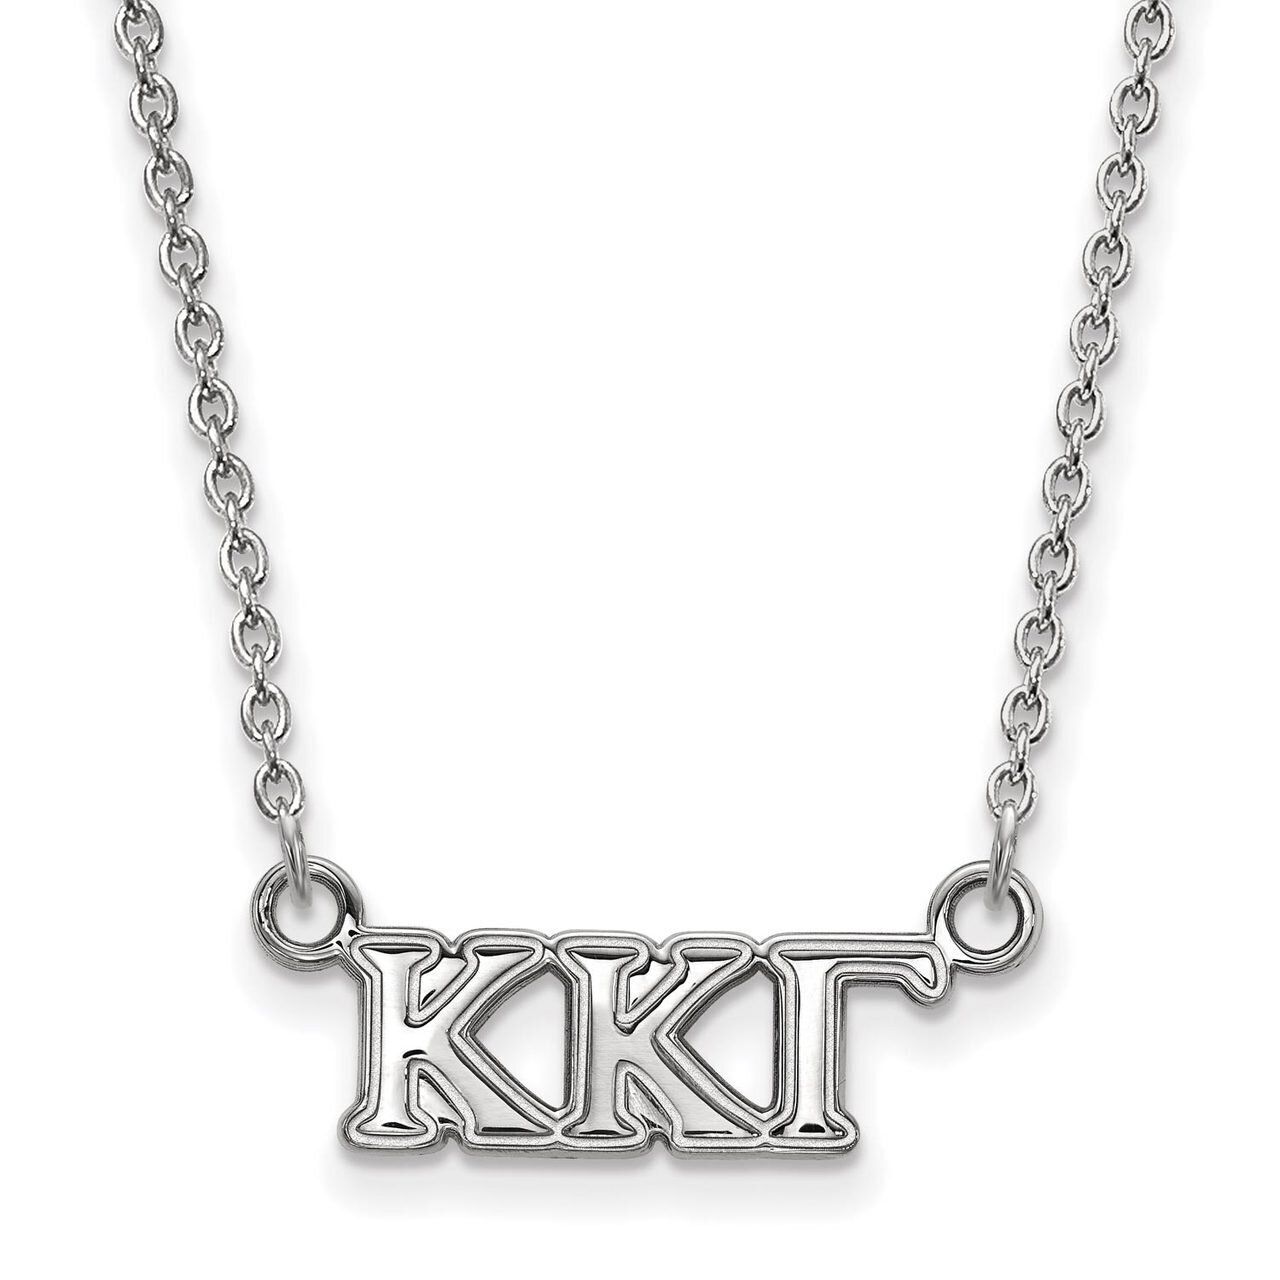 Kappa Kappa Gamma Extra Small Pendant with 18 Inch Chain Sterling Silver SS006KKG-18